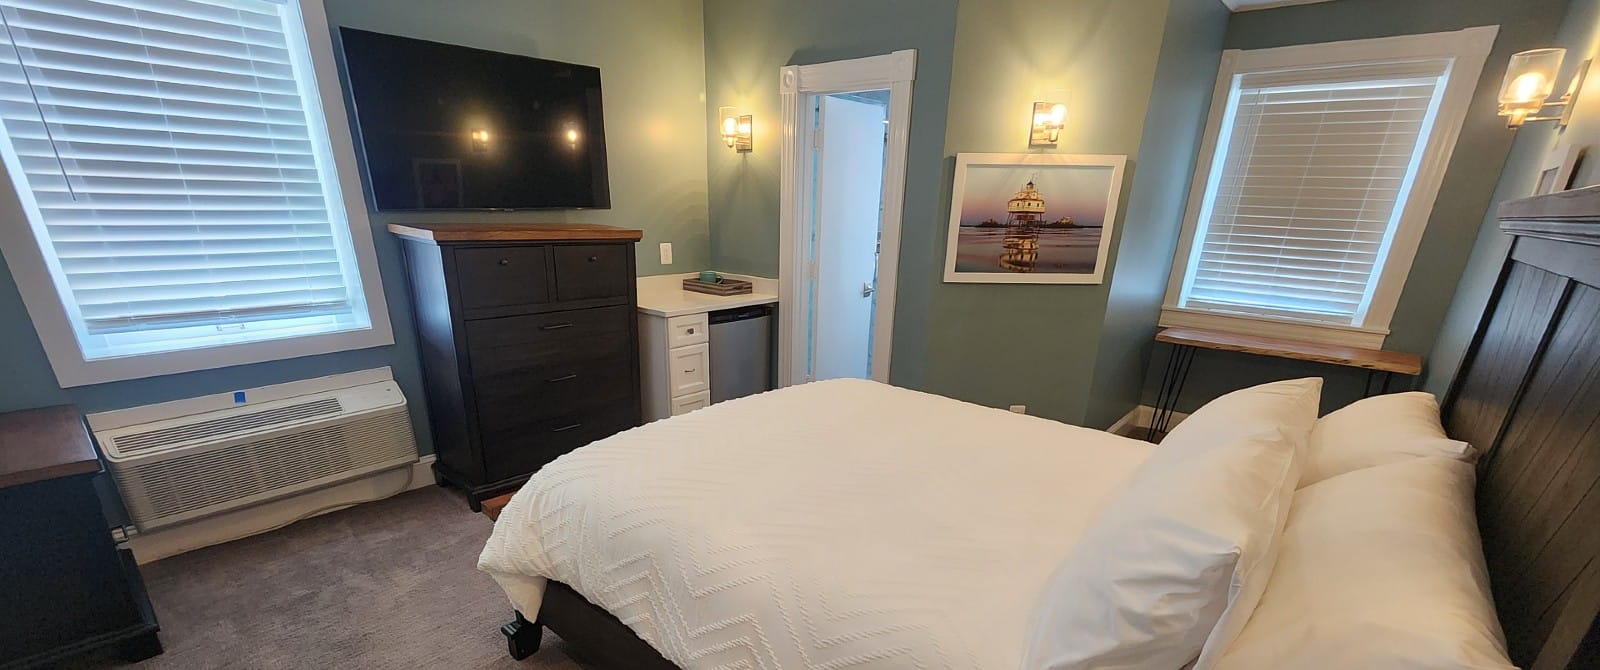 Bedroom with king bed in a white quilt, tall dresser wth TV above, windows with blinds and doorway into a bathroom